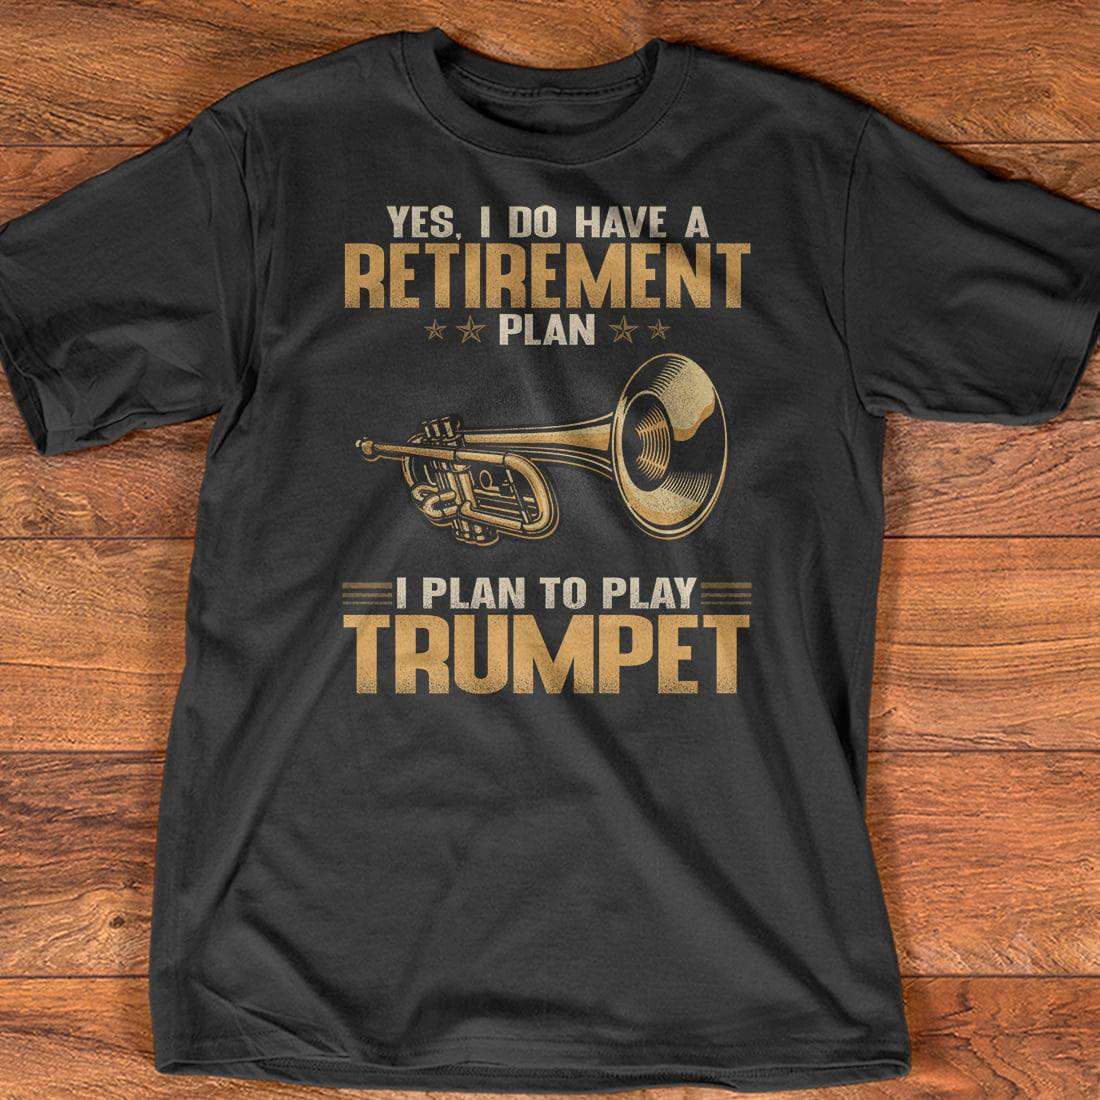 Yes, I do have a retirement plan I plan to plan trumpet - Trumpet instrument